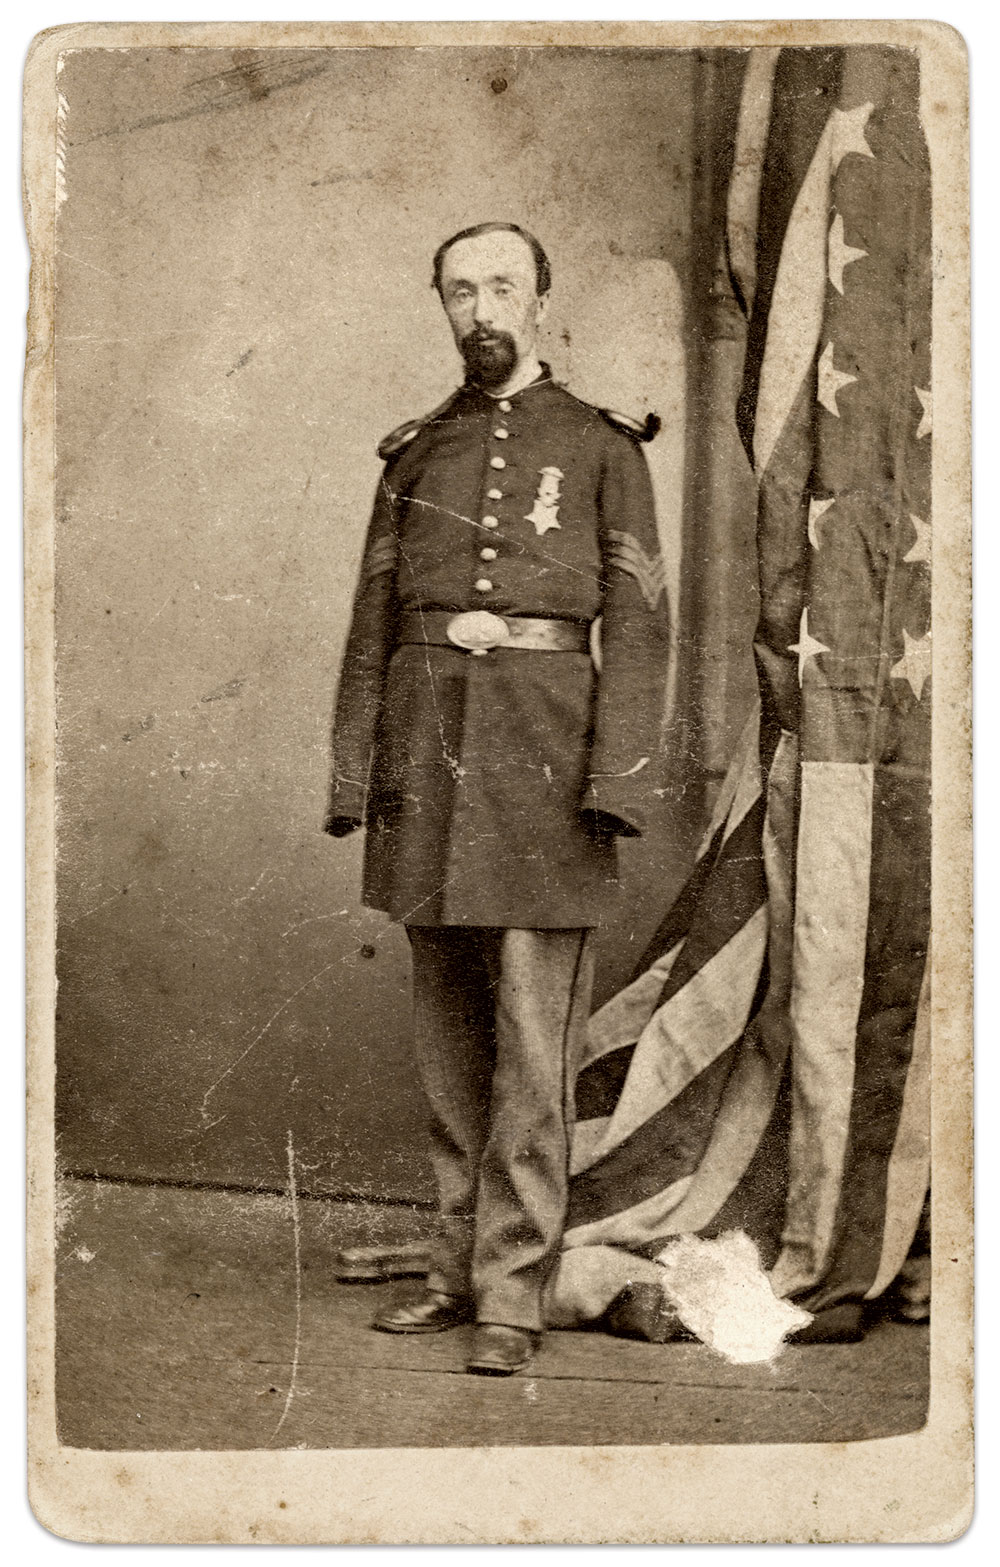 THE HERO, THE MEDAL: Plunkett wearing his Medal of Honor, circa 1866. Carte de visite by Albin Yeaw and Merchant H. Lufkin of Lawrence, Mass.